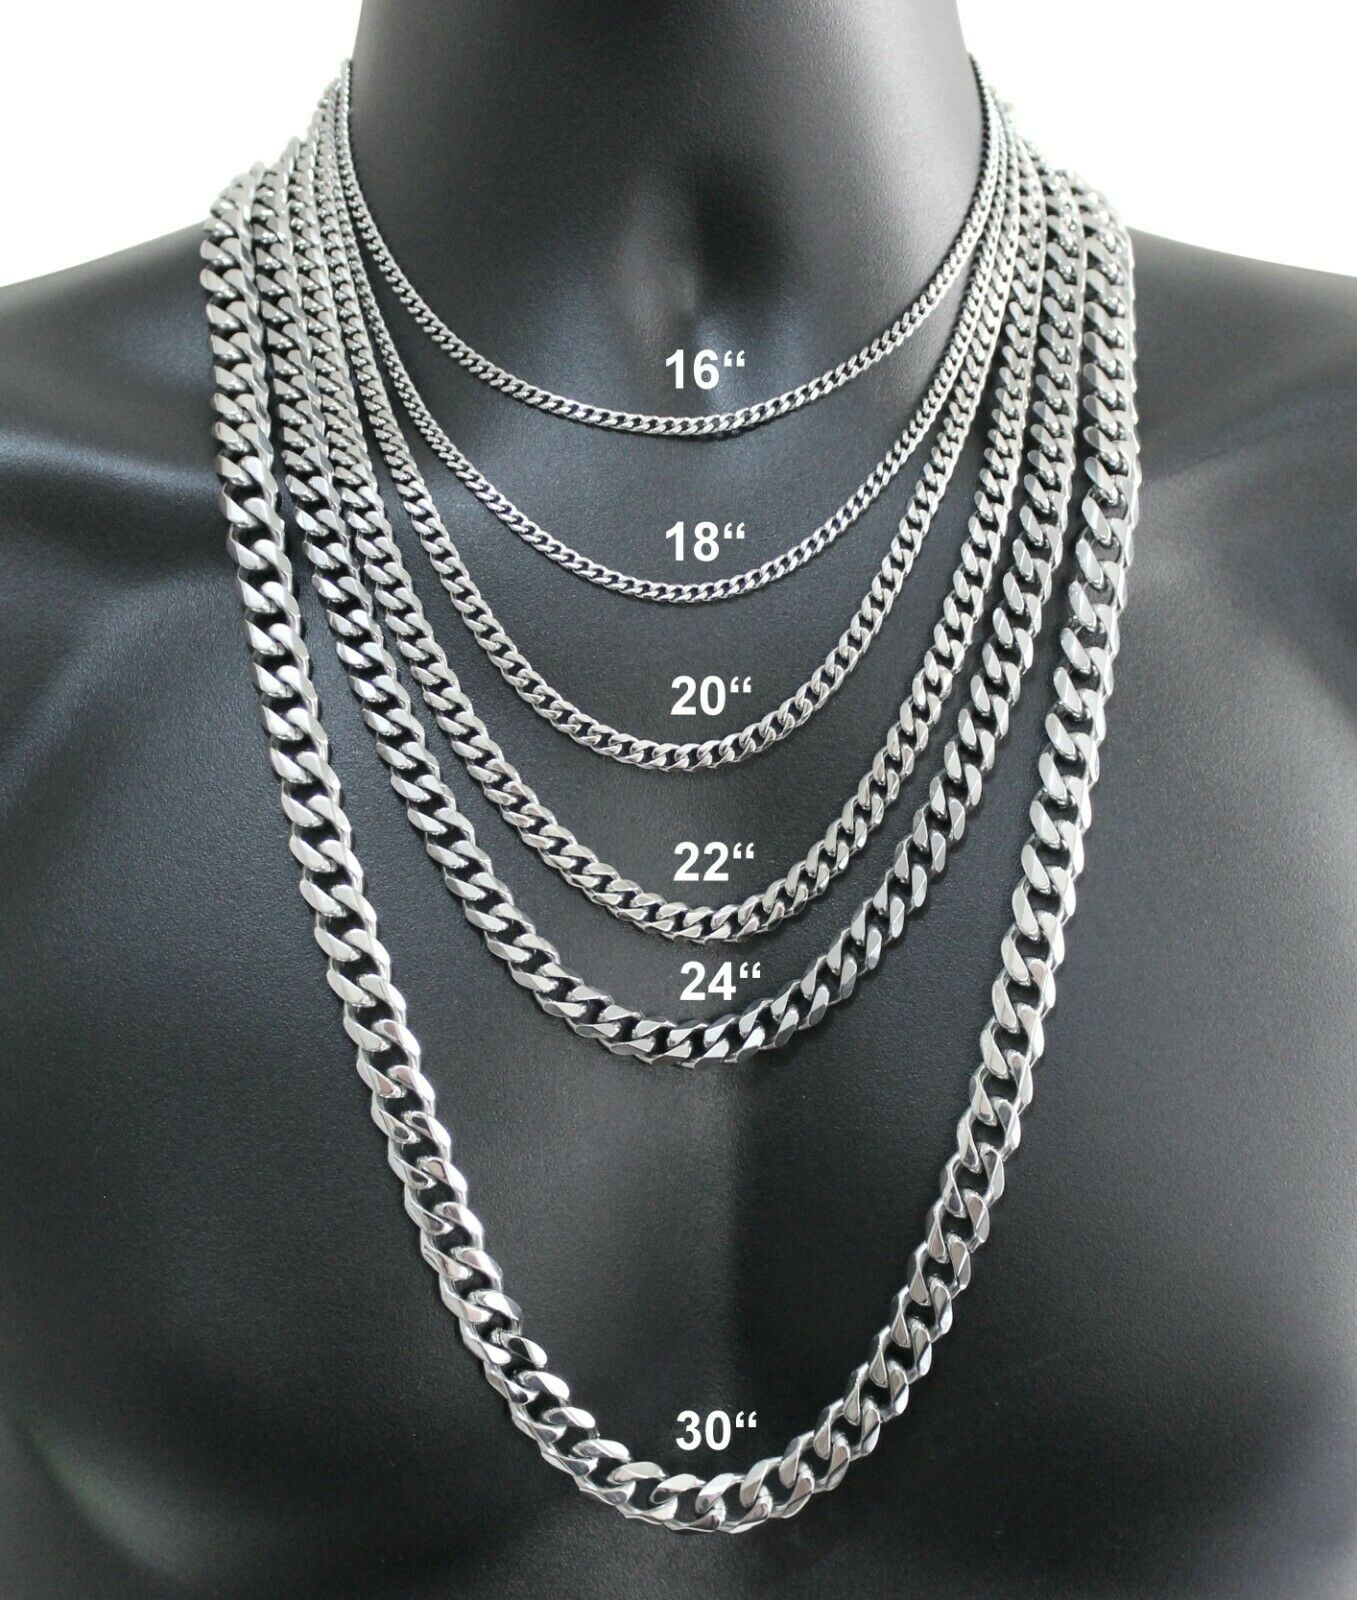 15MM Fully Iced Micro Paved Gucci Link Necklace in Gold/White Gold